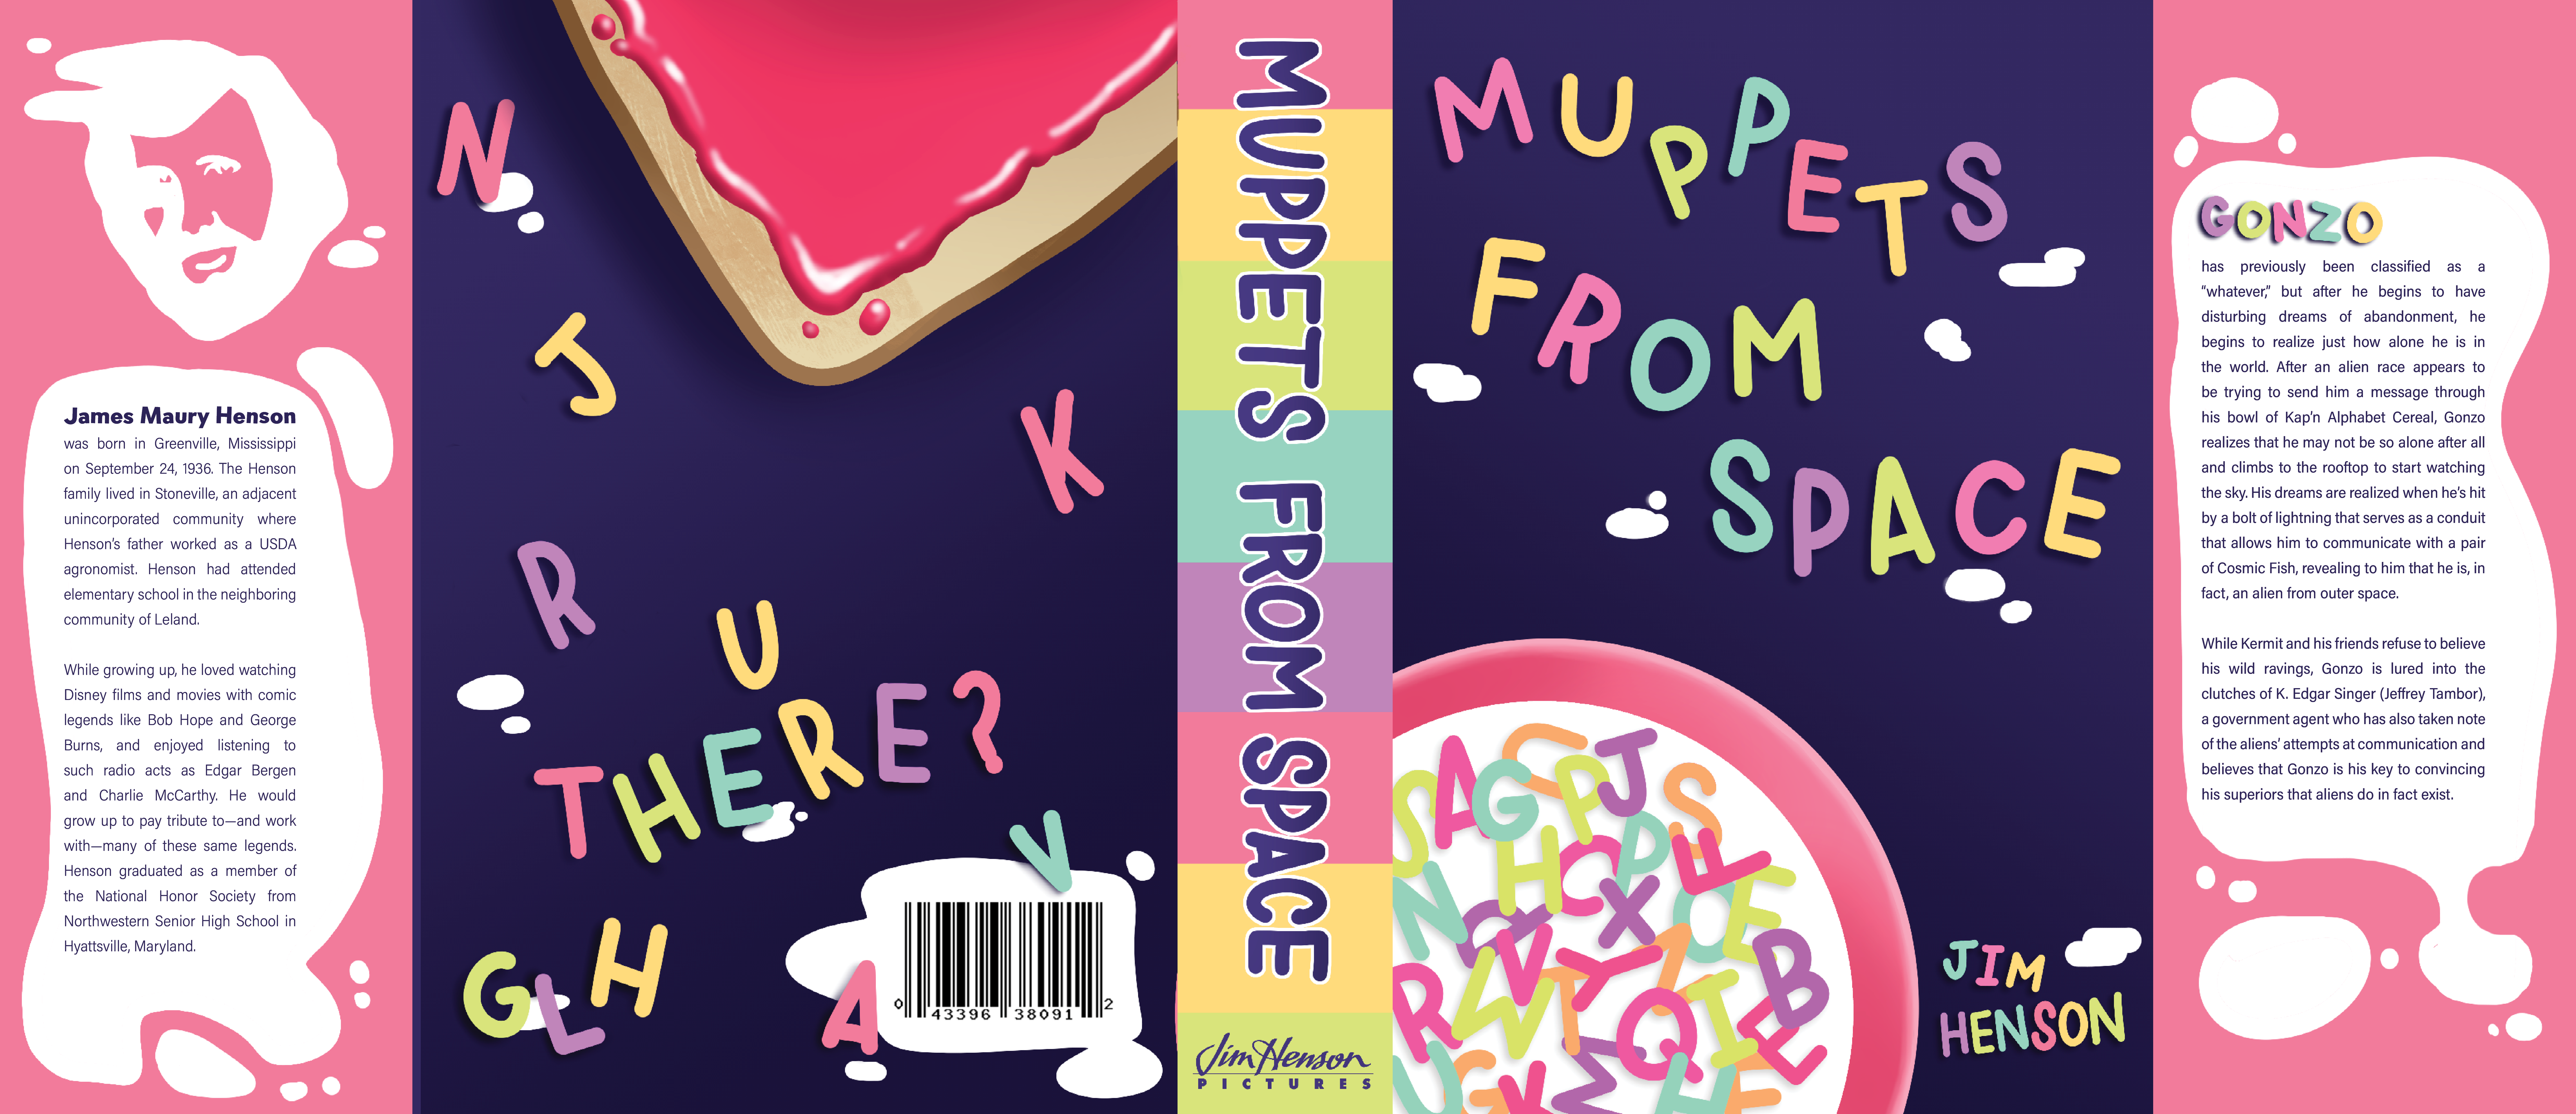 Muppets from Space Book Cover